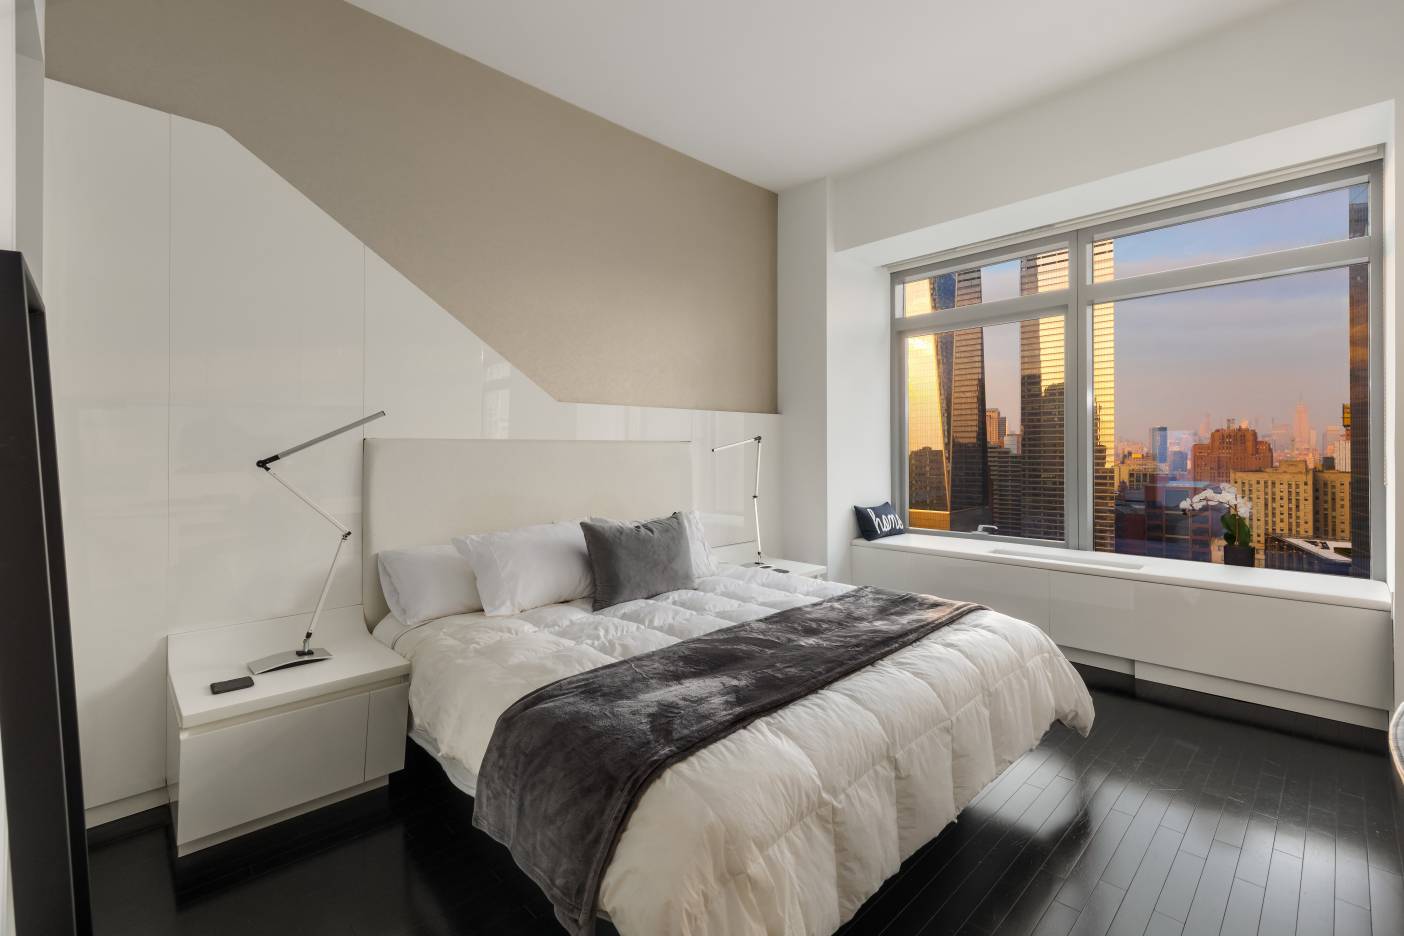 Located on the thirtieth floor of the building, this smartly outfitted one bedroom boasts unobstructed northern views of New York s most iconic buildings.